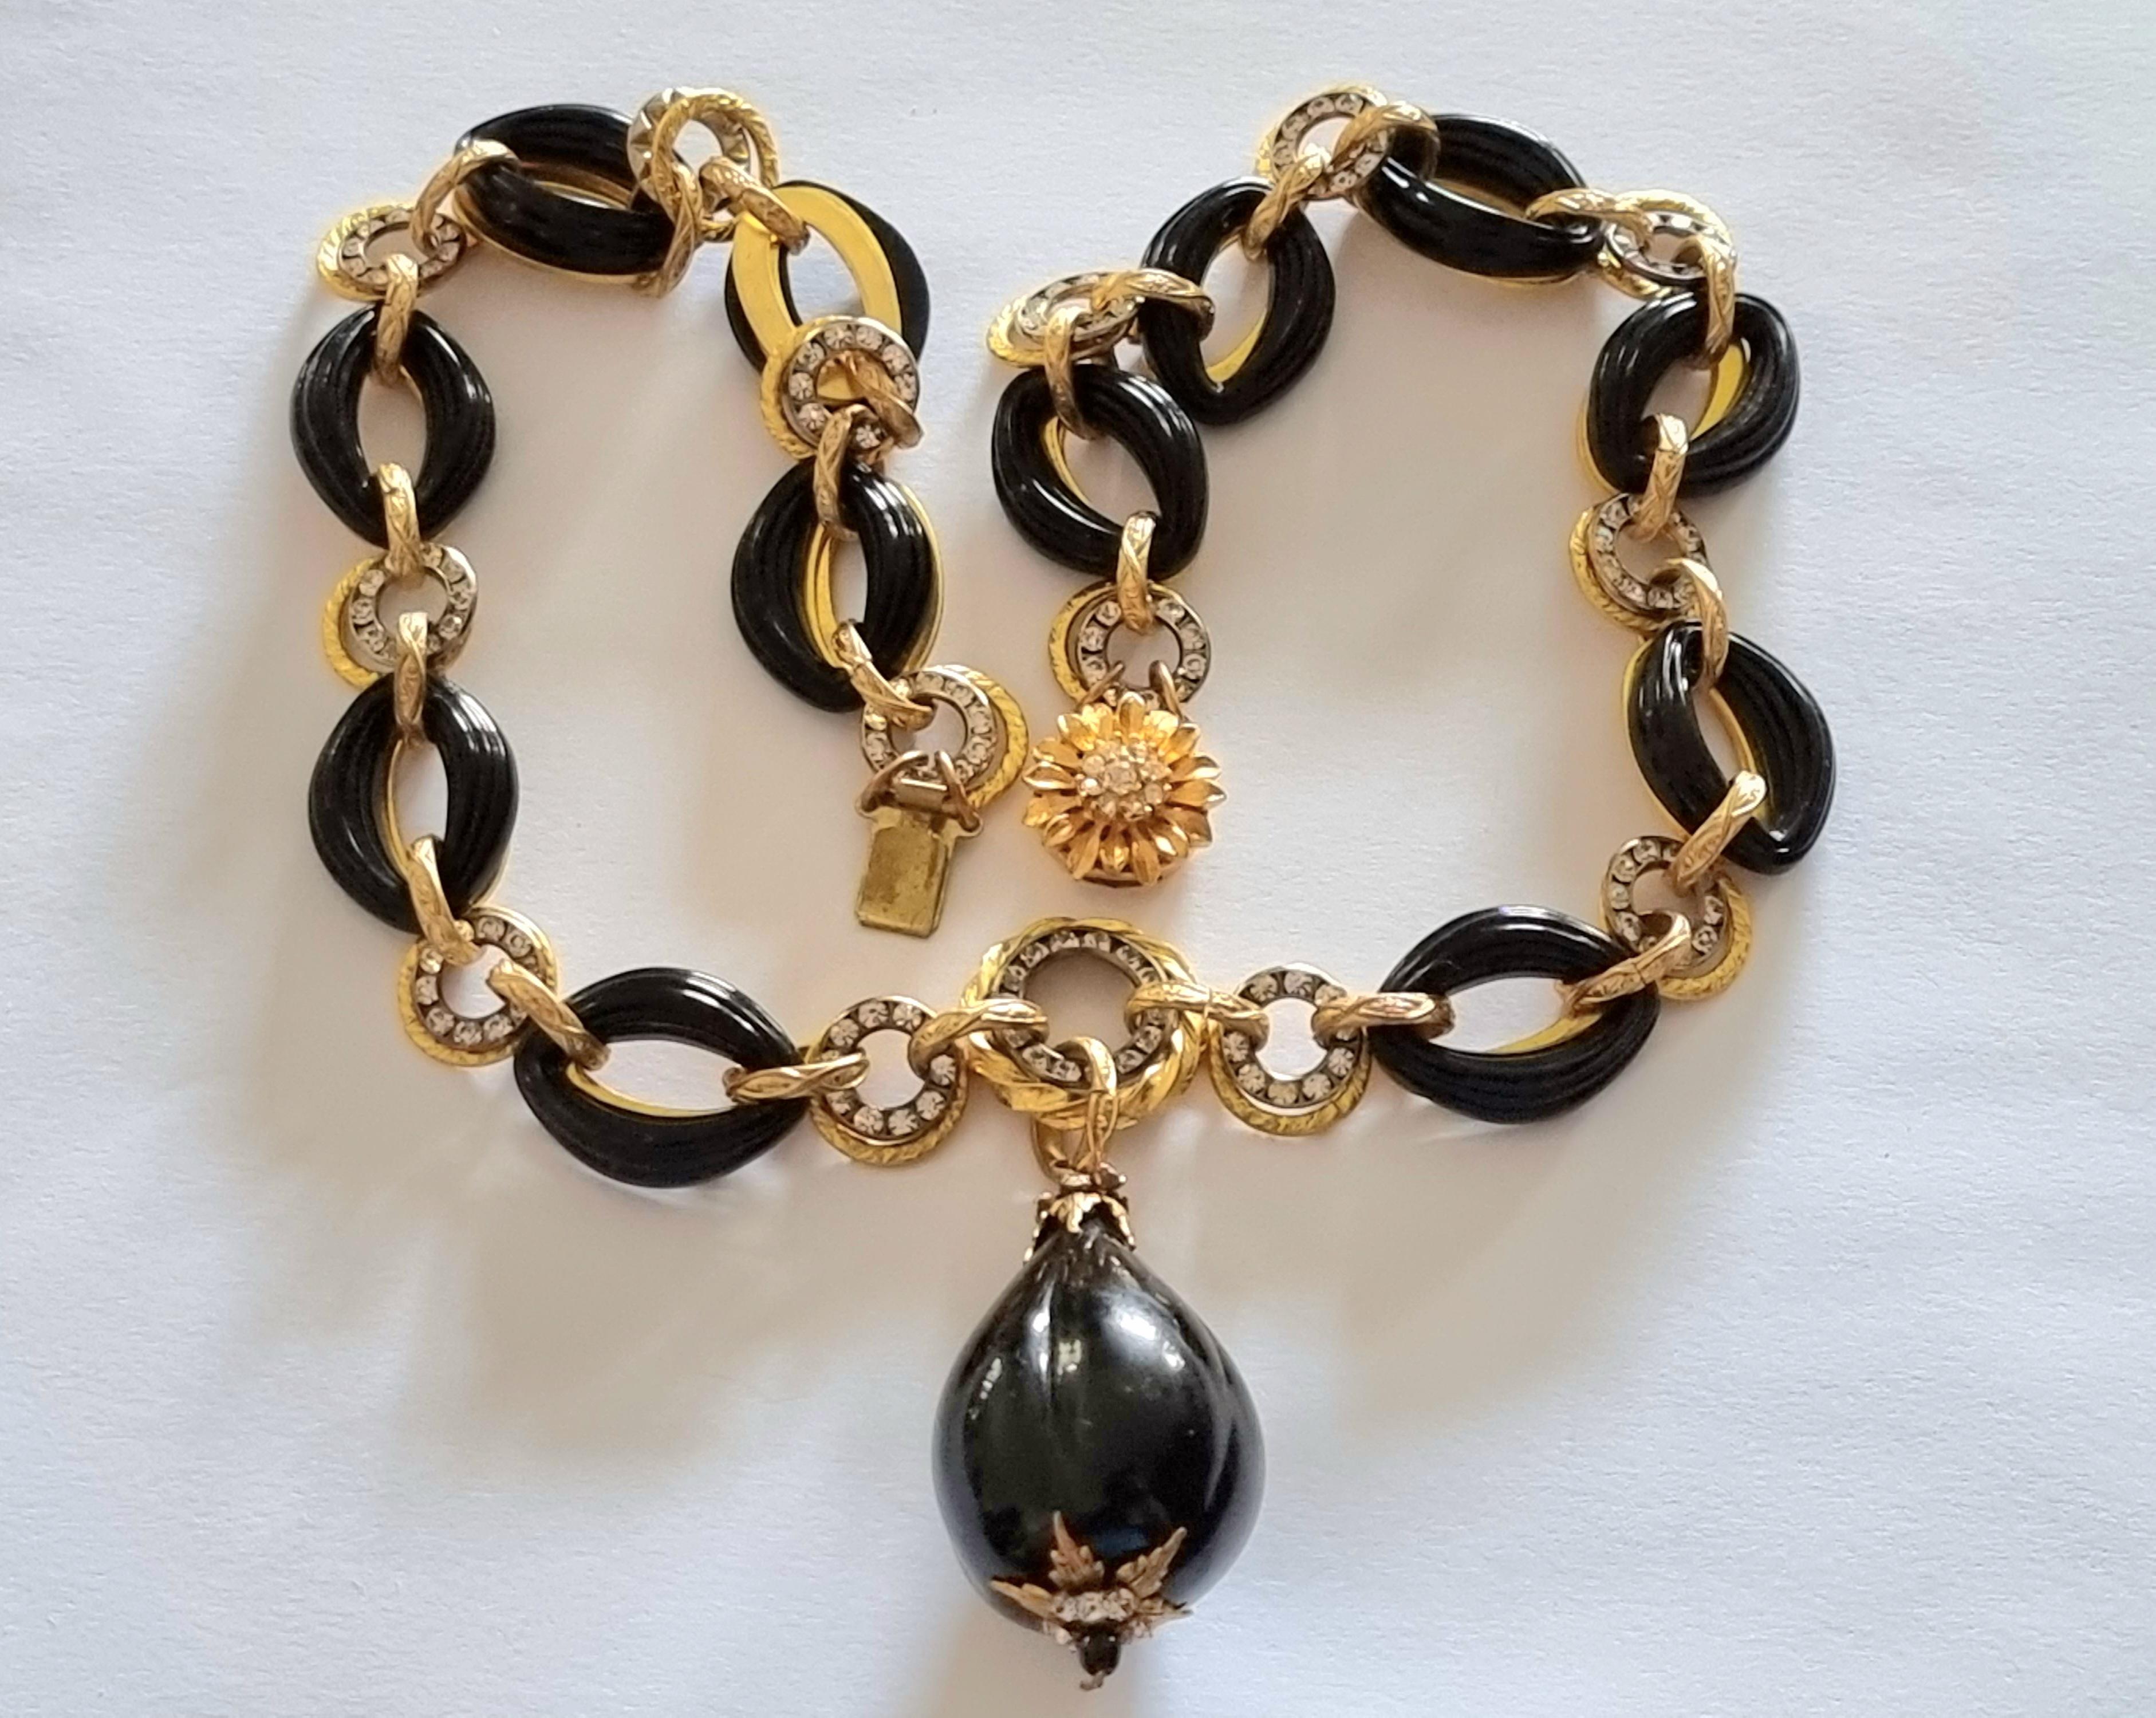 CHANEL, Magnificent vintage NECKLACE, High Fashion, France 1